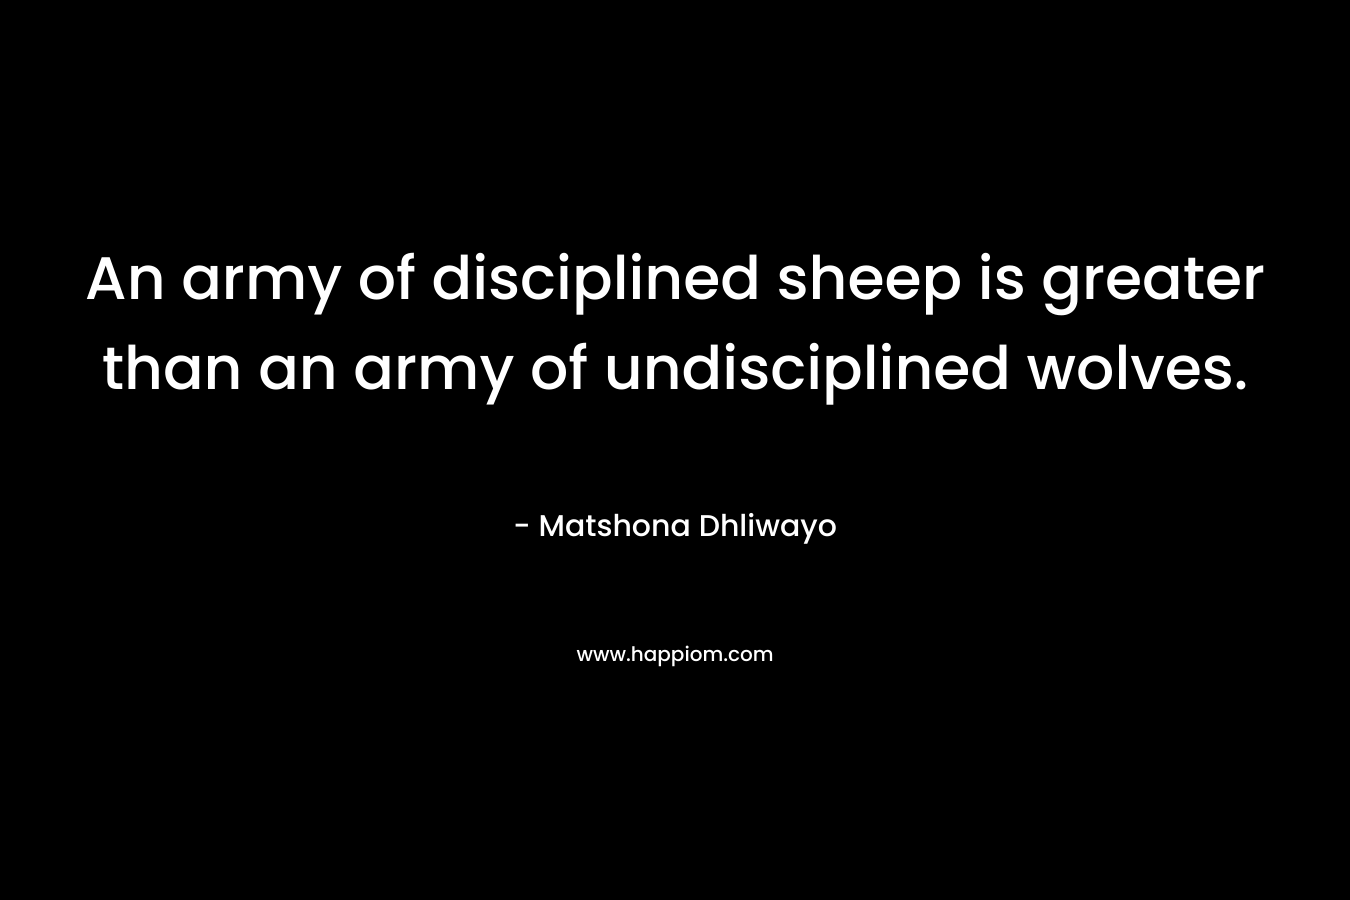 An army of disciplined sheep is greater than an army of undisciplined wolves. – Matshona Dhliwayo